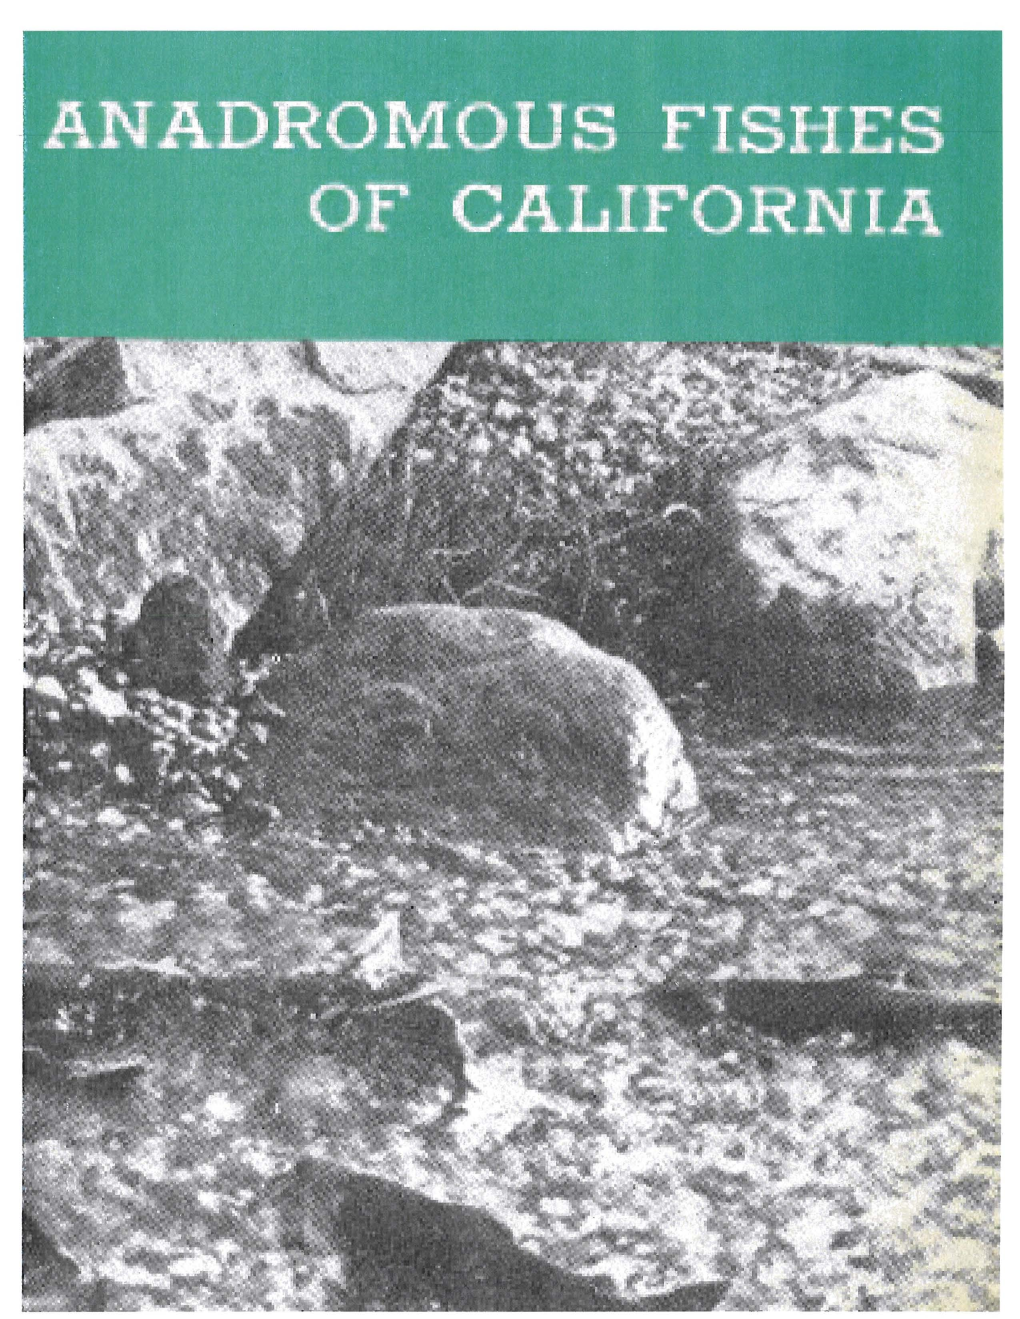 Anadromous Fishes of California Introduction